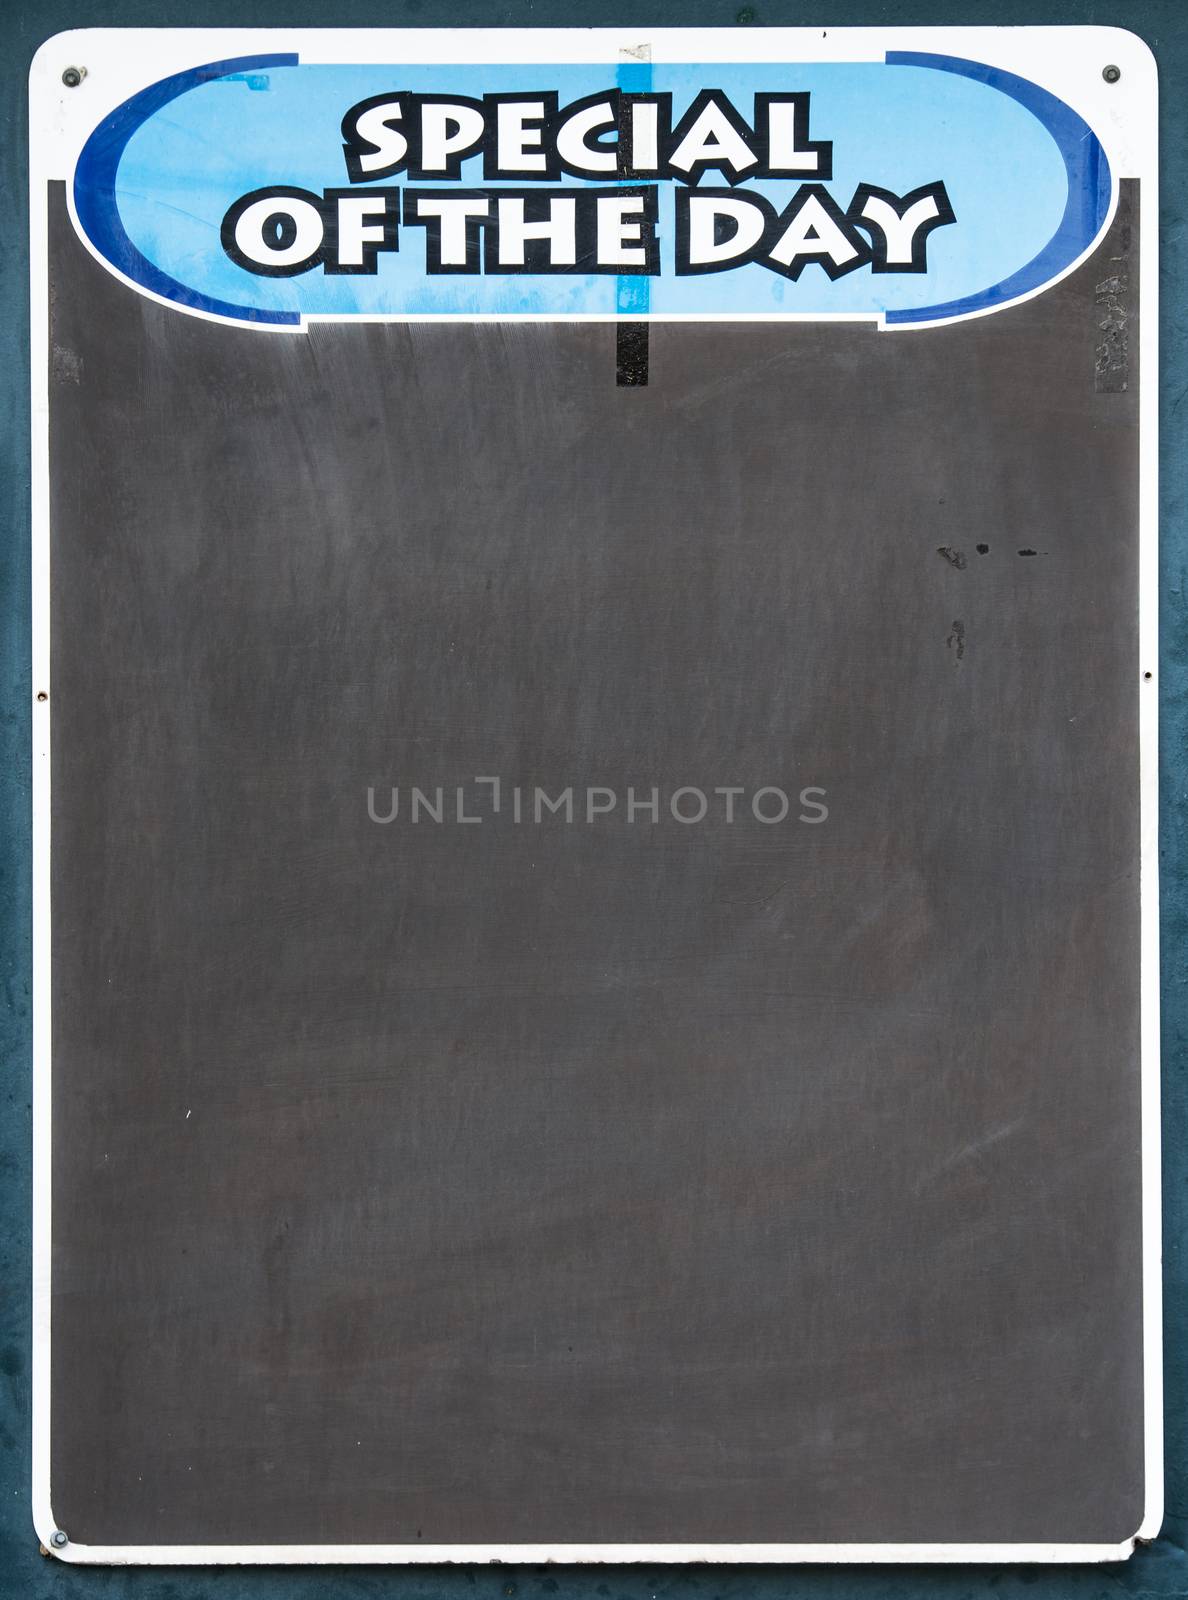 Special of the Day Board by thisboy